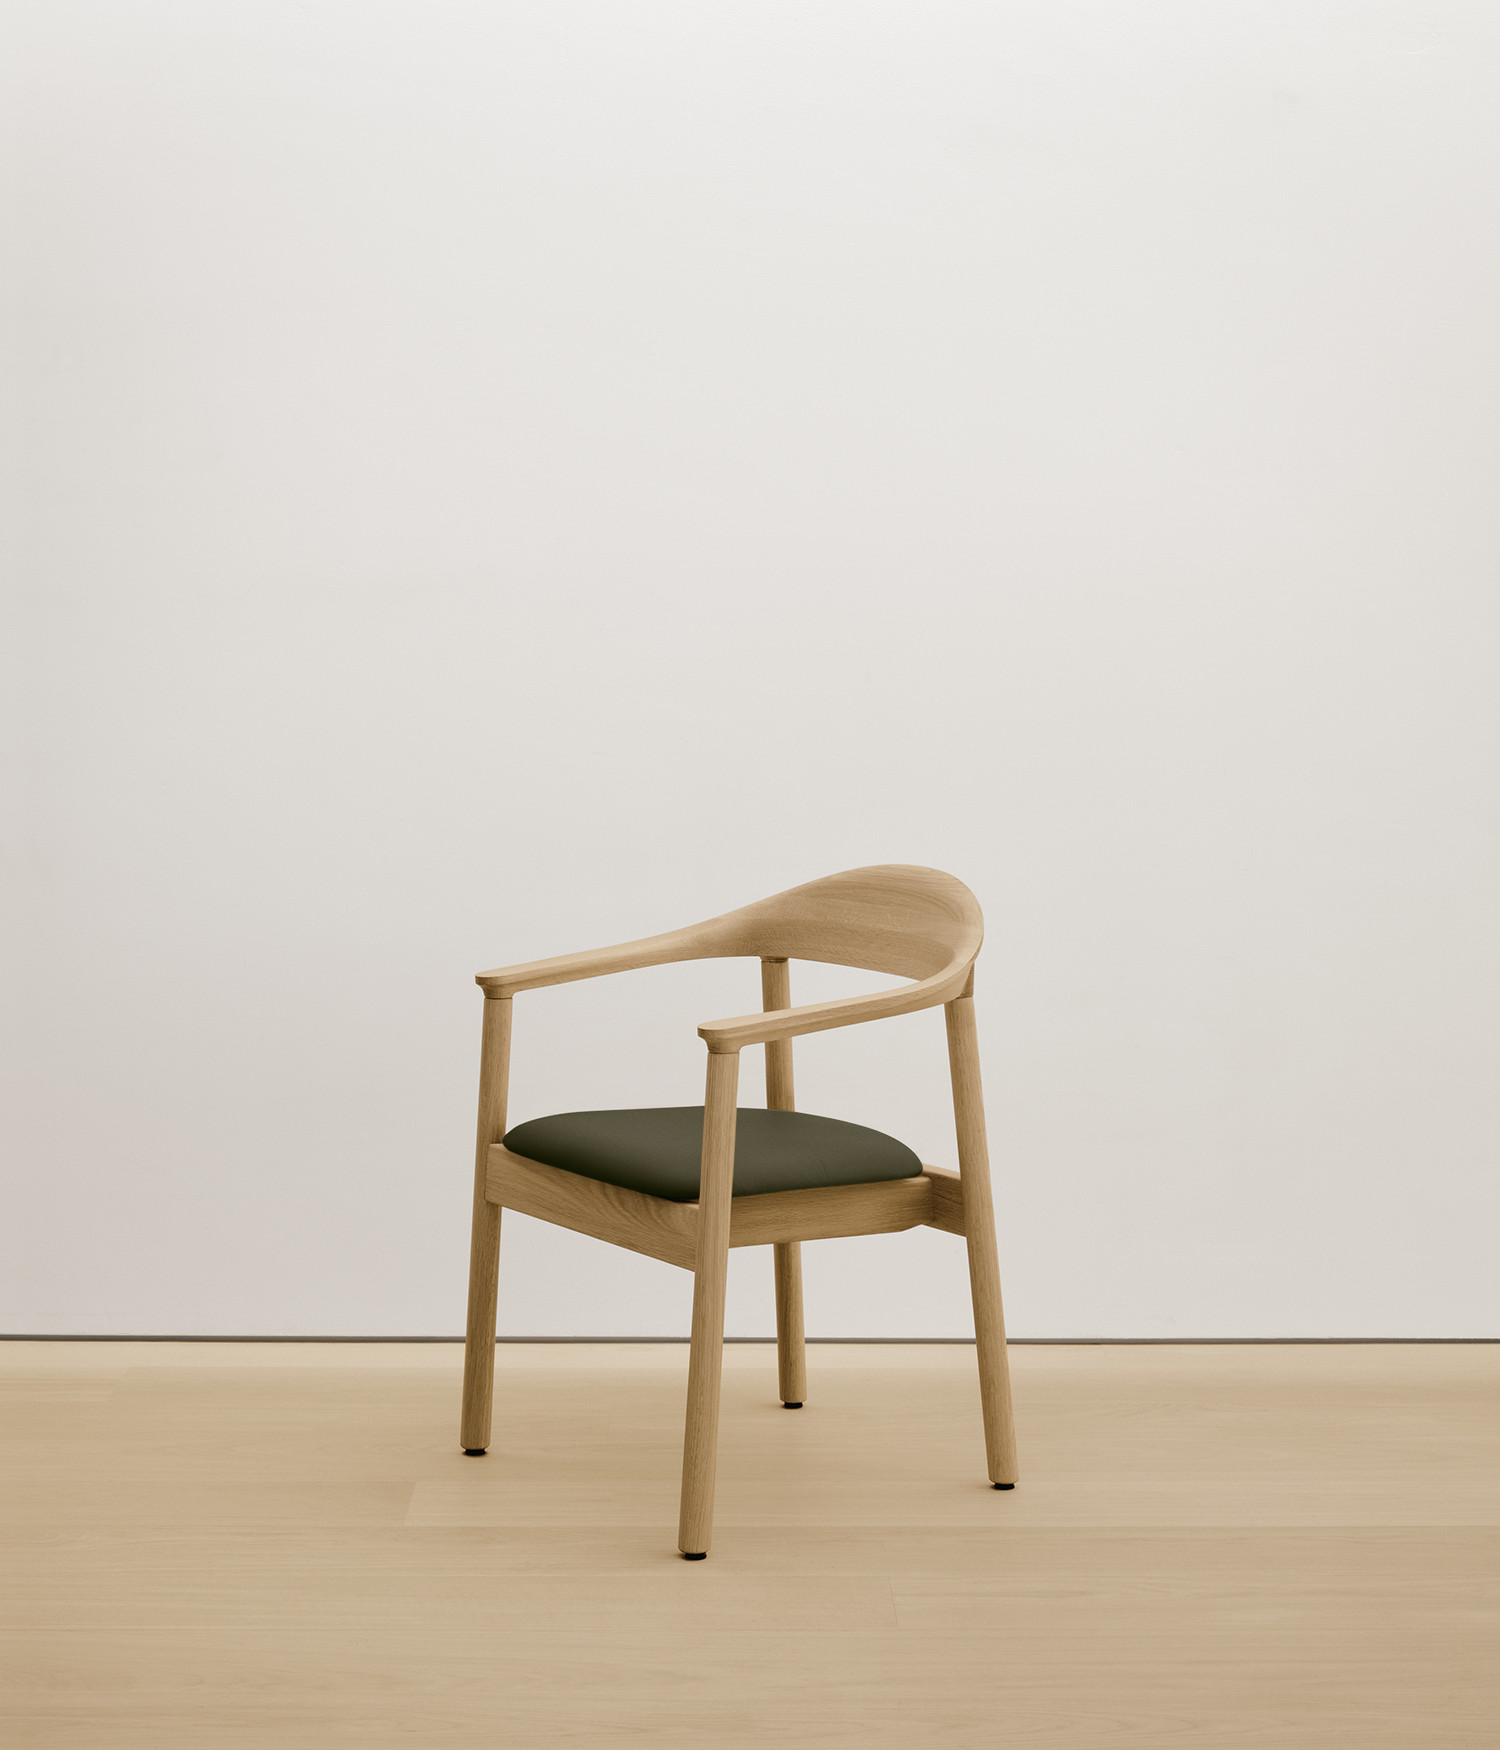  white-oak chair with forest color upholstered seat